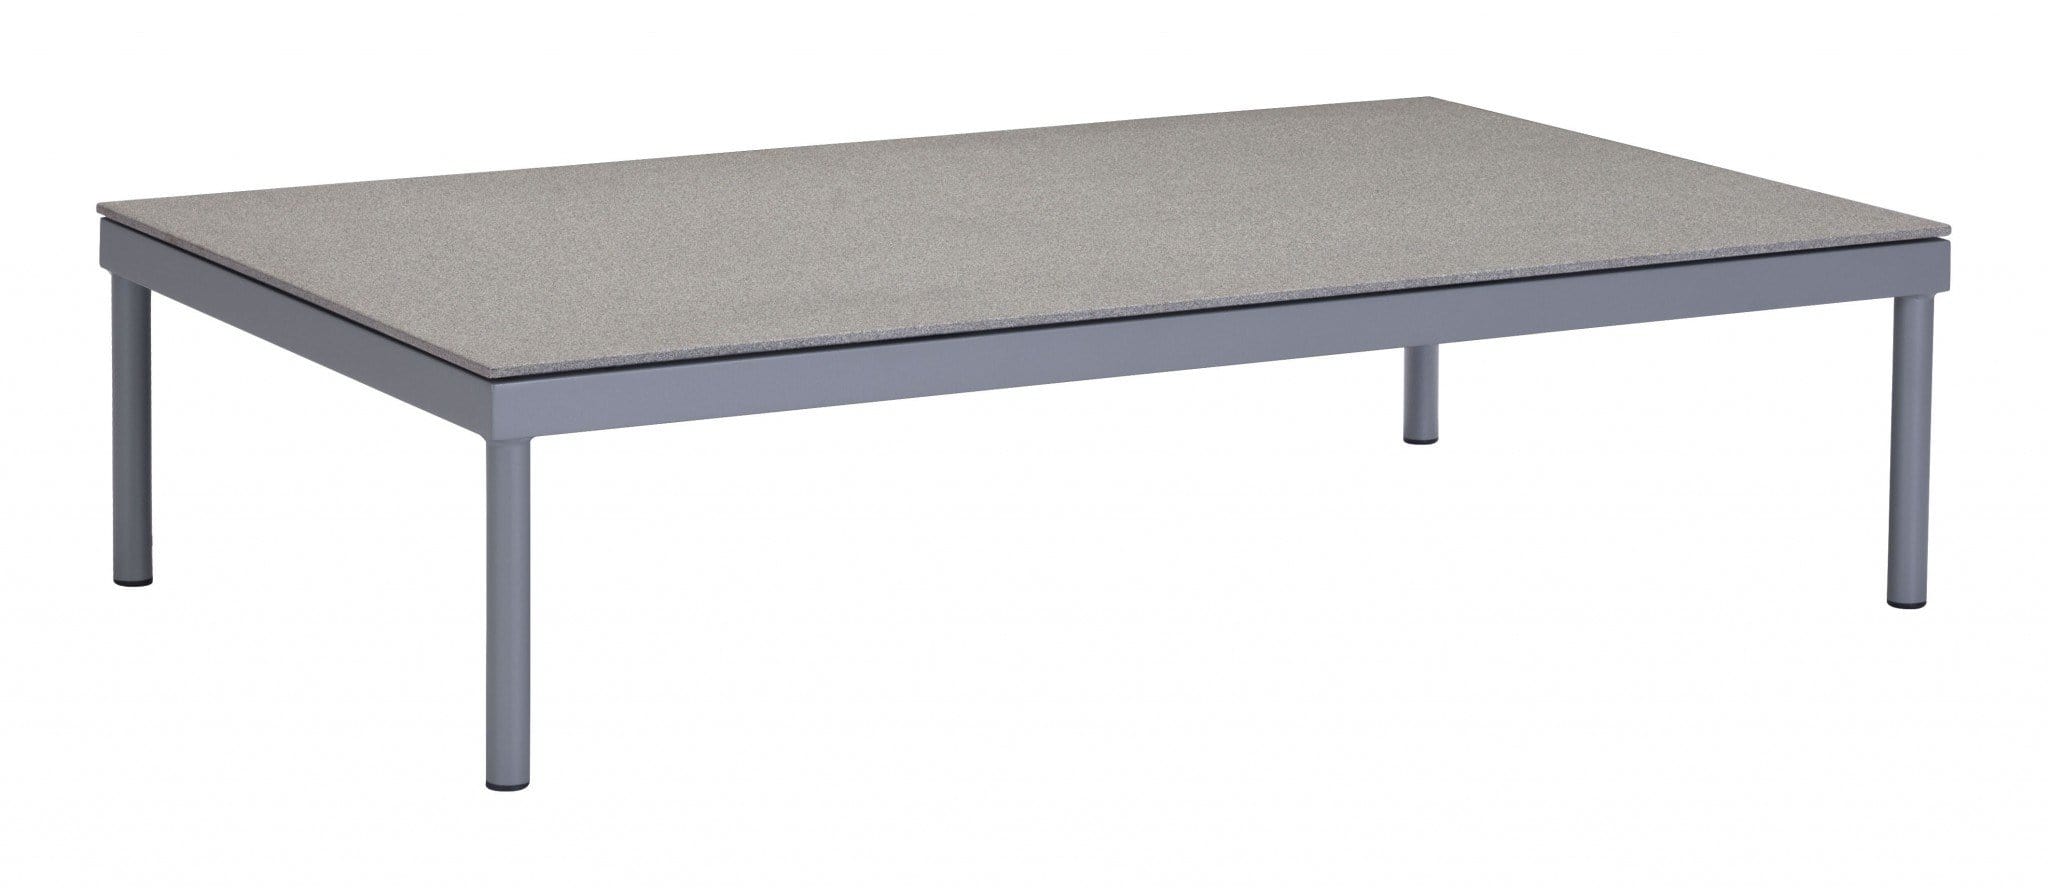 HomeRoots Outdoors Outdoor Furniture > Outdoor Tables Gray & Granite / Faux Granite Tempered Glass, Powder Coated Aluminu 47" x 29.5" x 11.7" Gray & Granite, Tempered Glass, Aluminum, Beach Coffee Table